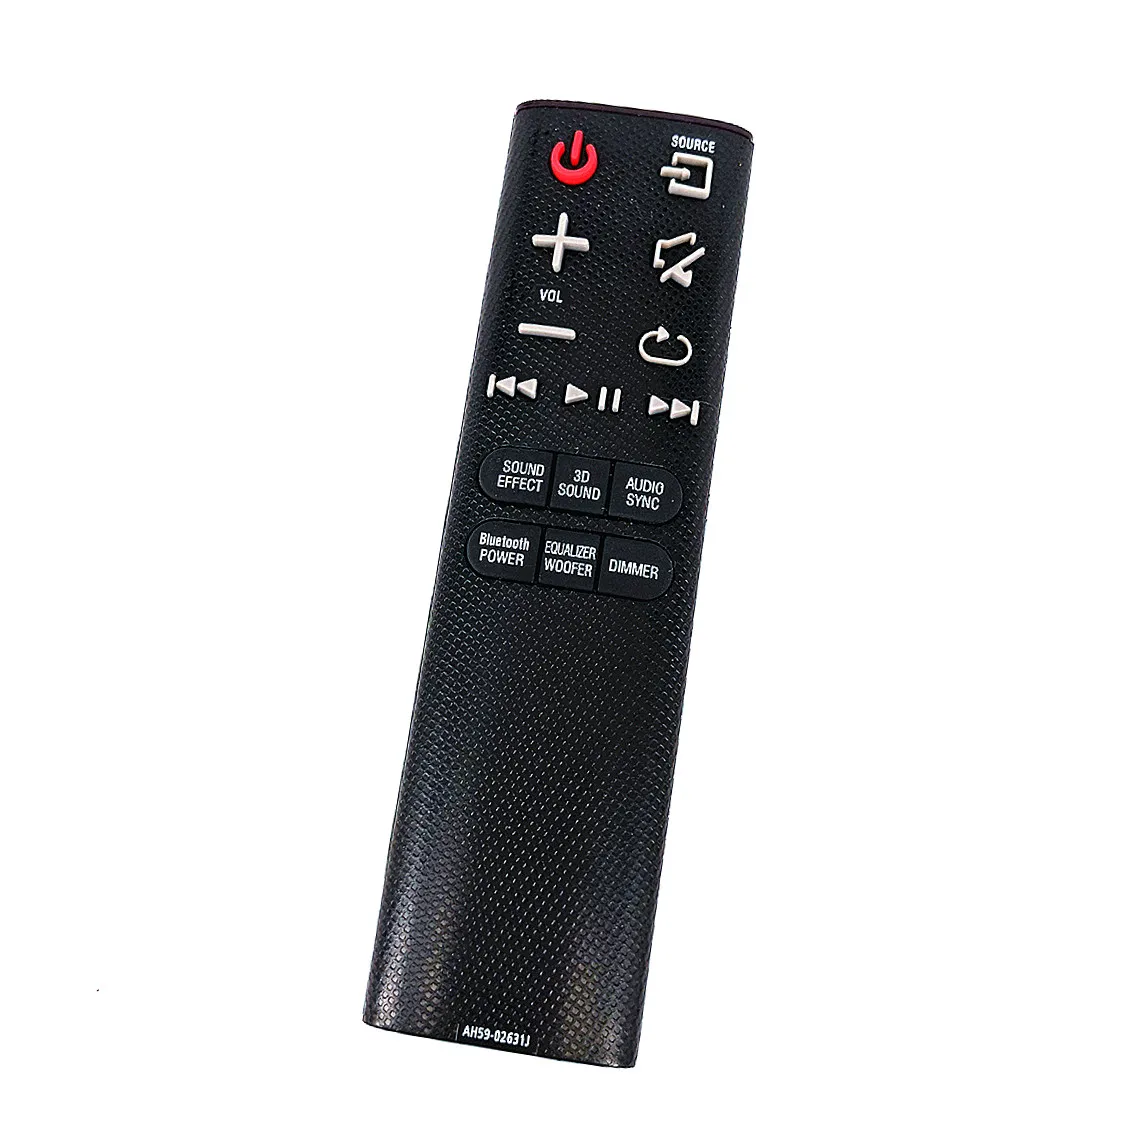 

AH59-02631J New Remote Control fit for Samsung Soundbar HW-H430 HW-H450 HW-HM45 HW-HM45C HWH430 HWH450 HWHM45 HWHM45C